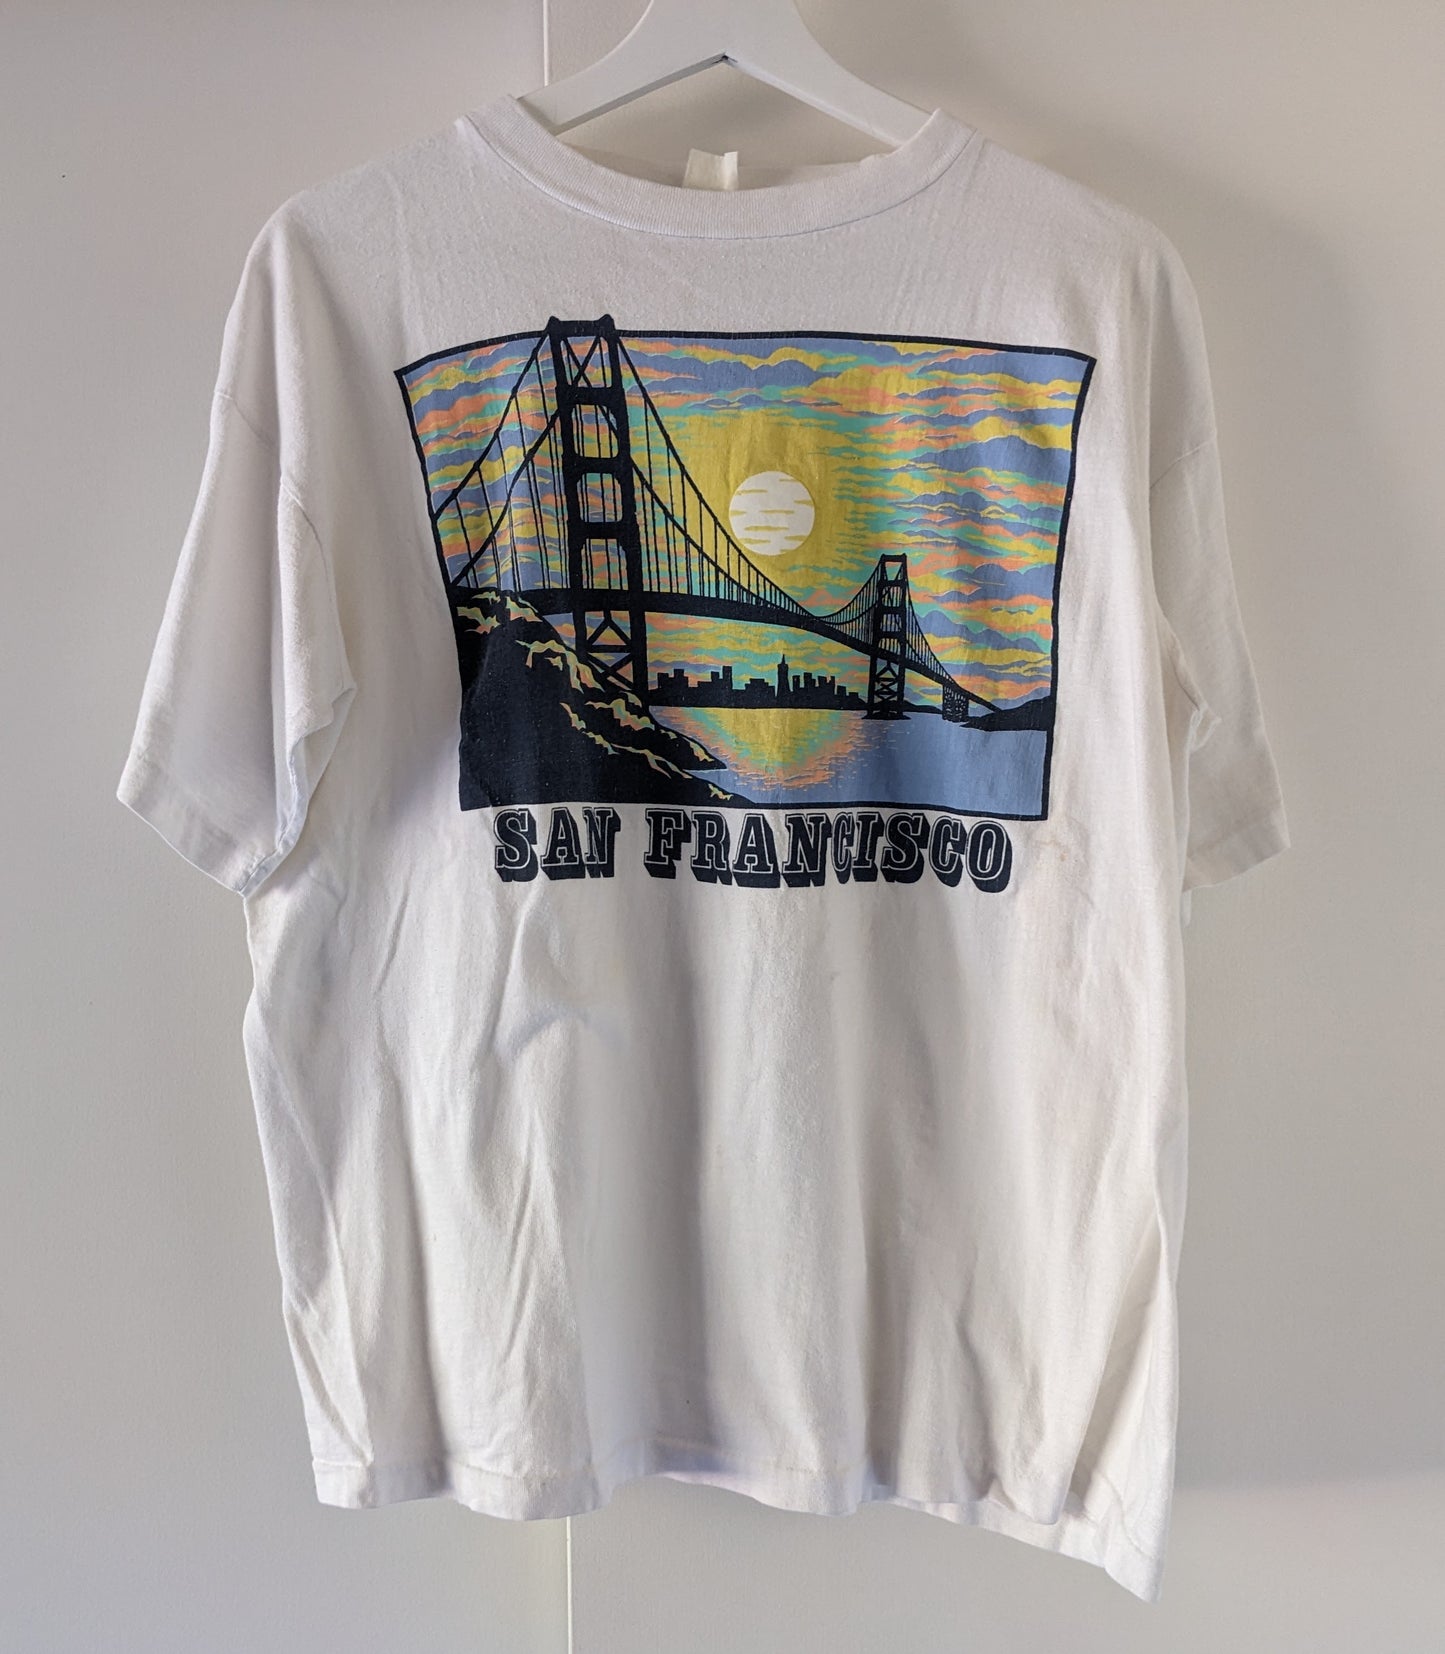 White shirt with San Francisco pastel sunset graphic